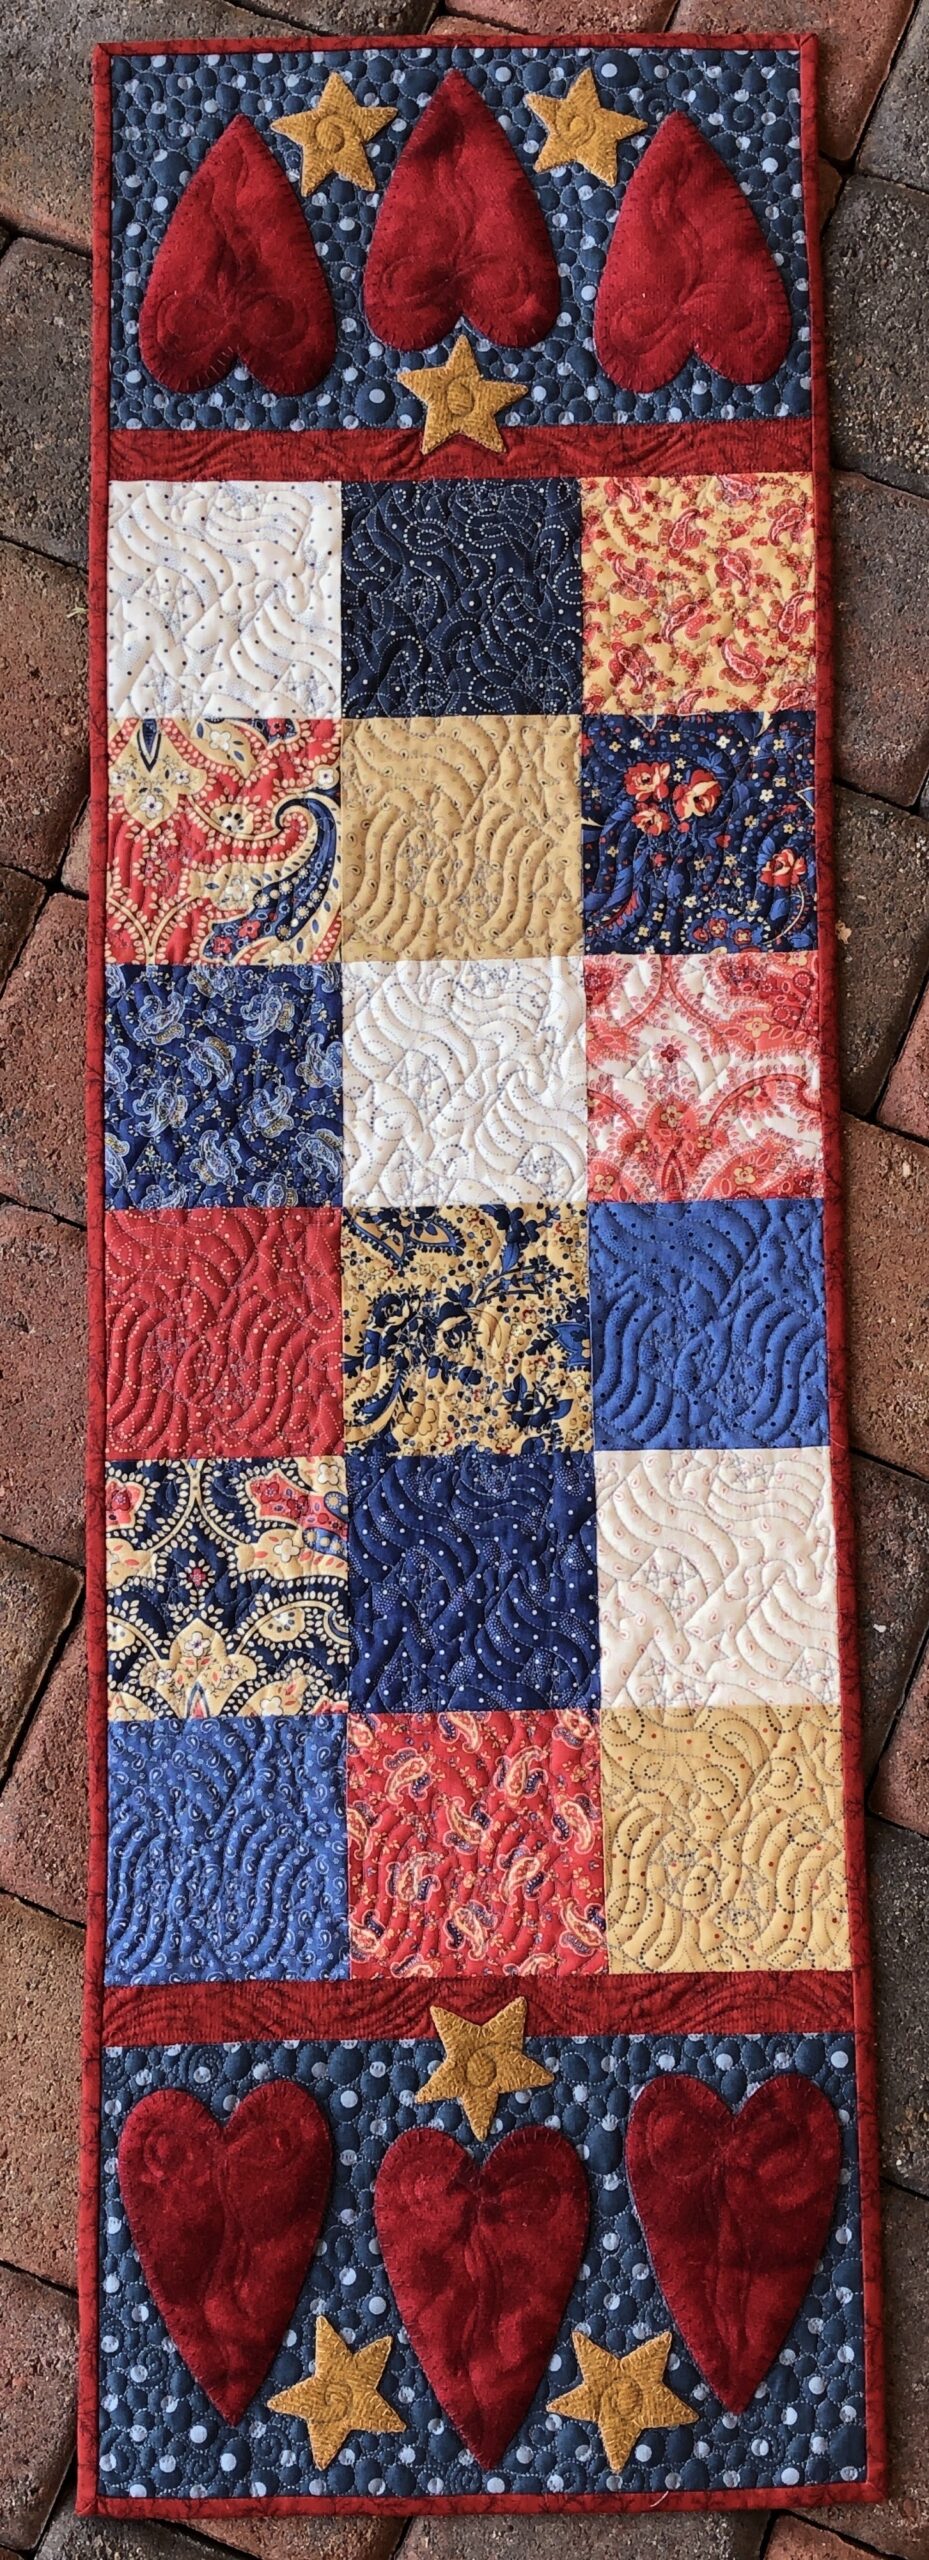 Stratified Table Centre Quilt Kit